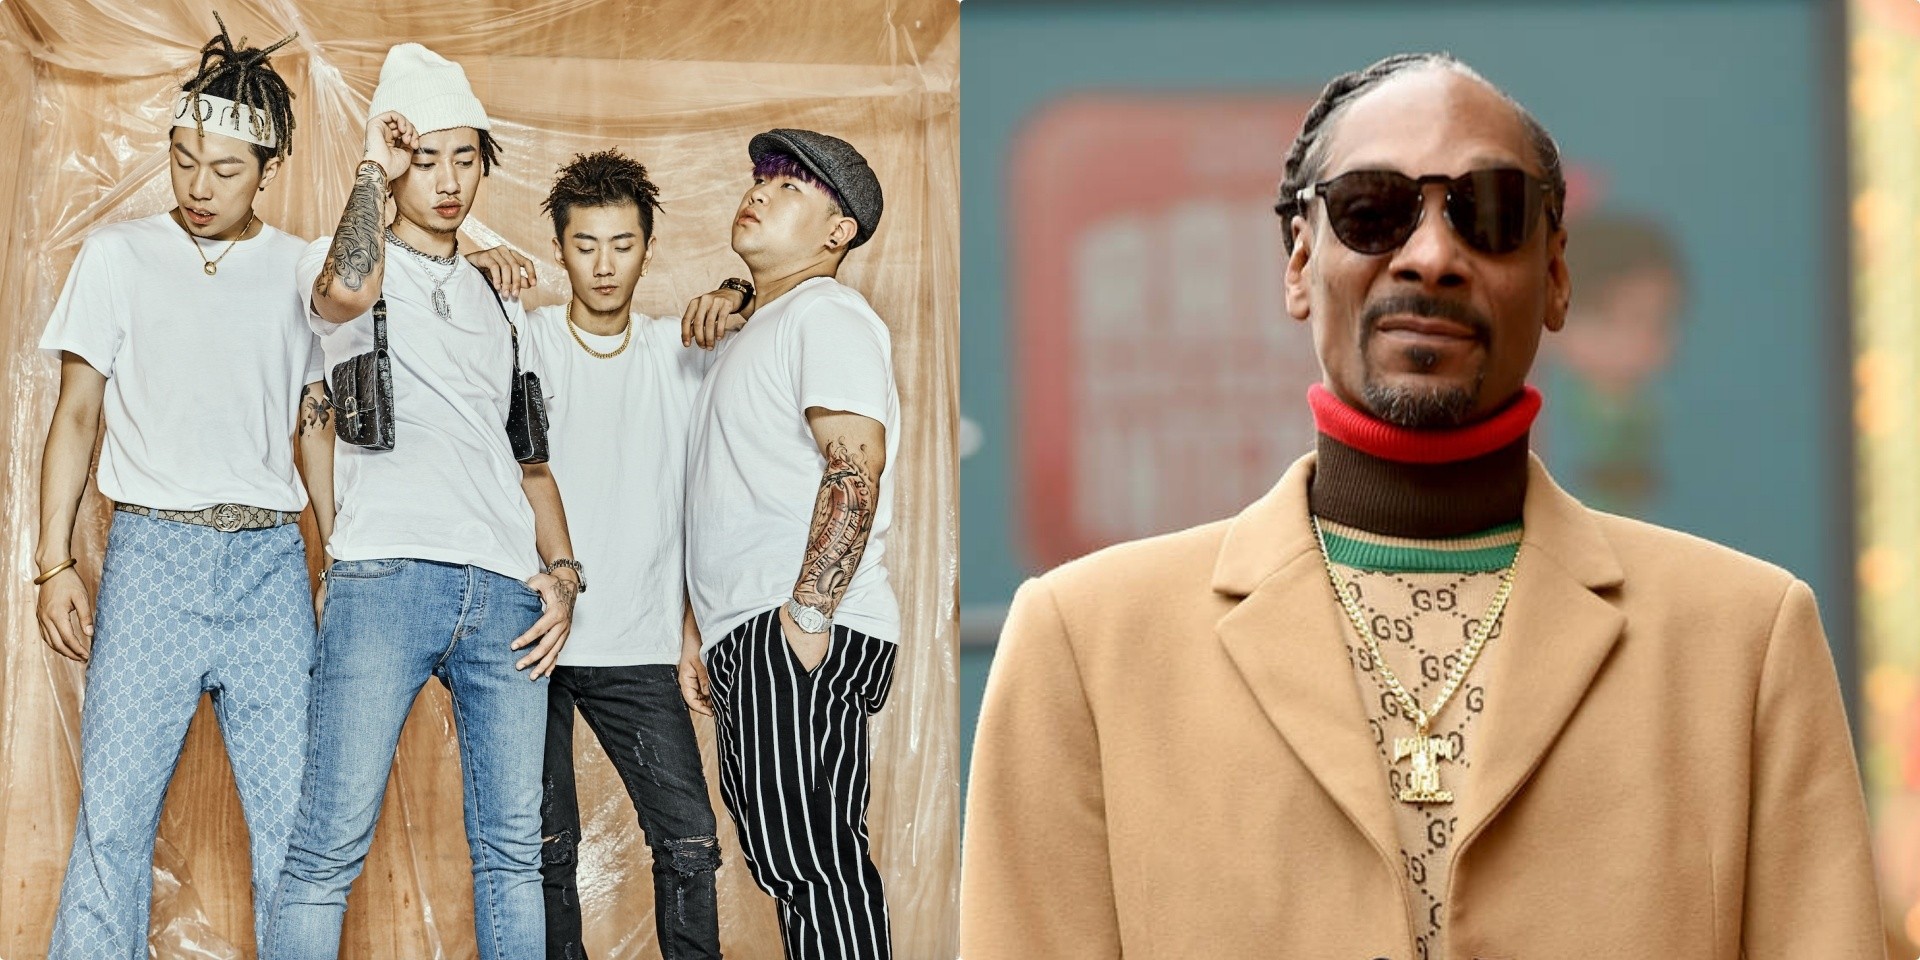 Higher Brothers and Snoop Dogg team up on new track, ‘Friends & Foes’ for Netflix’s Wu Assassins – listen